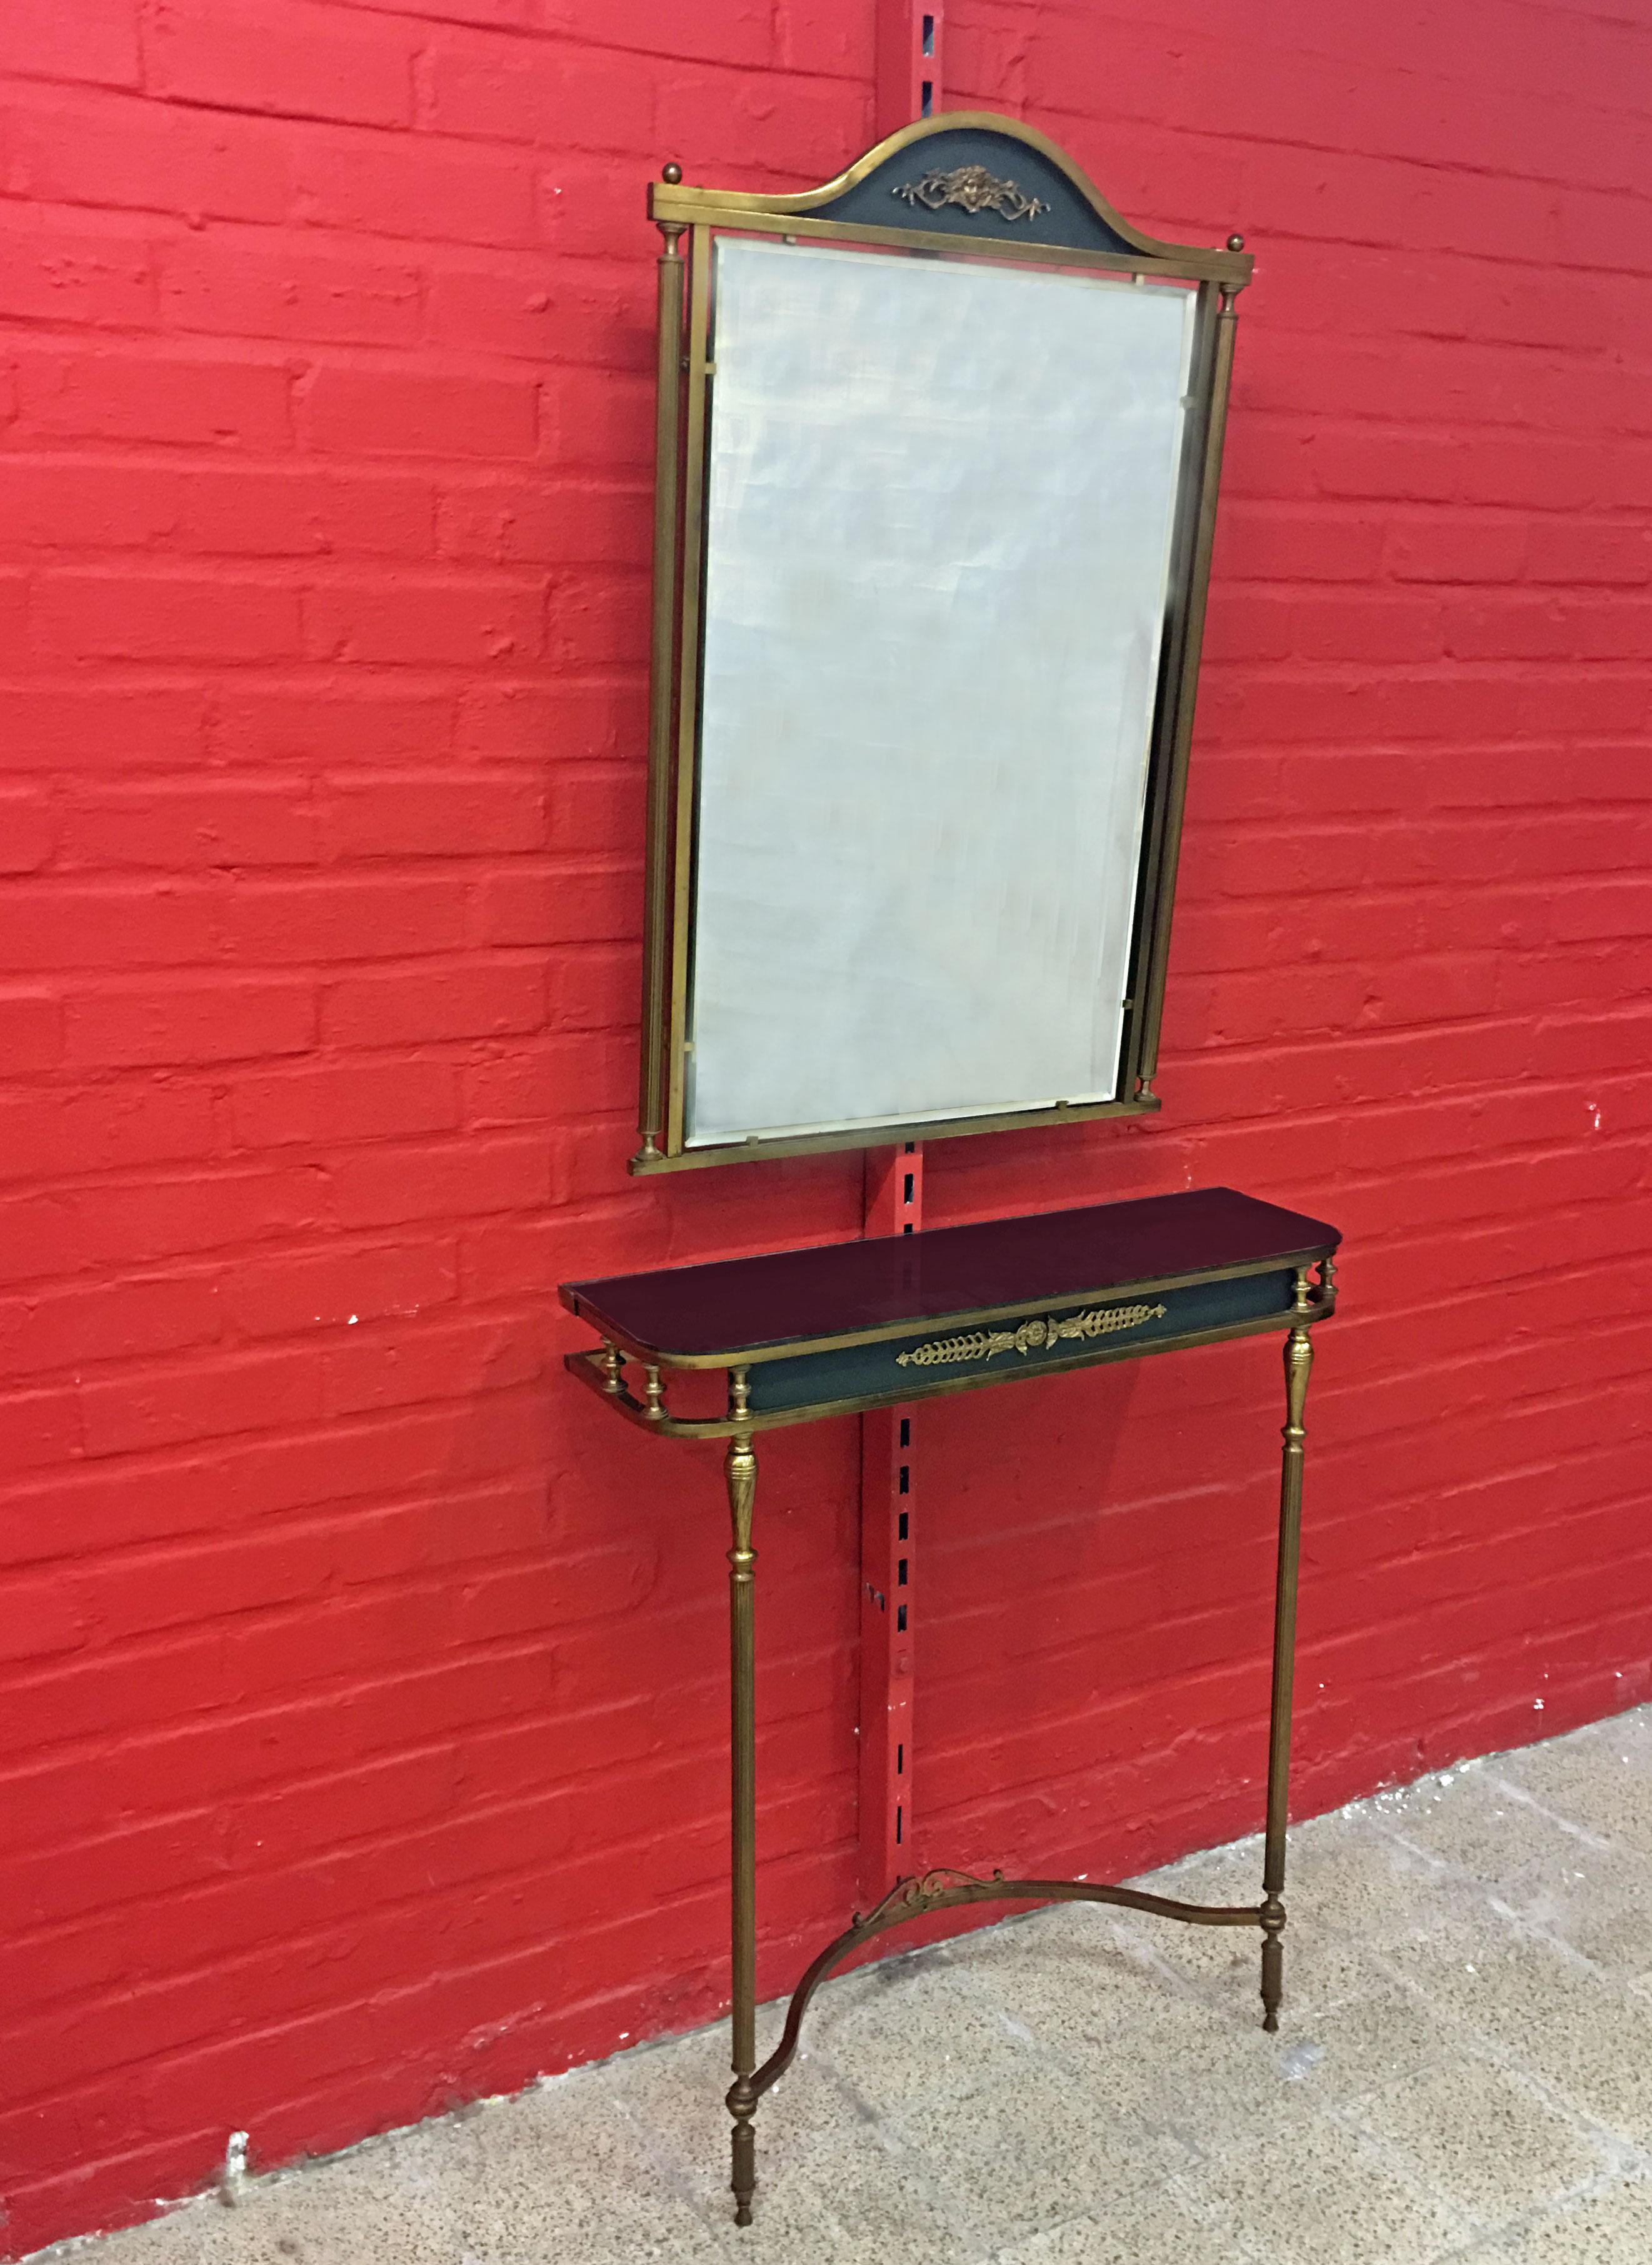 Console table and mirror in brass and lacquered metal, circa 1950-1960
Dimensions console H 95, W 75, D 23 cm
Dimensions mirror H 88, W 67, D 3 cm.